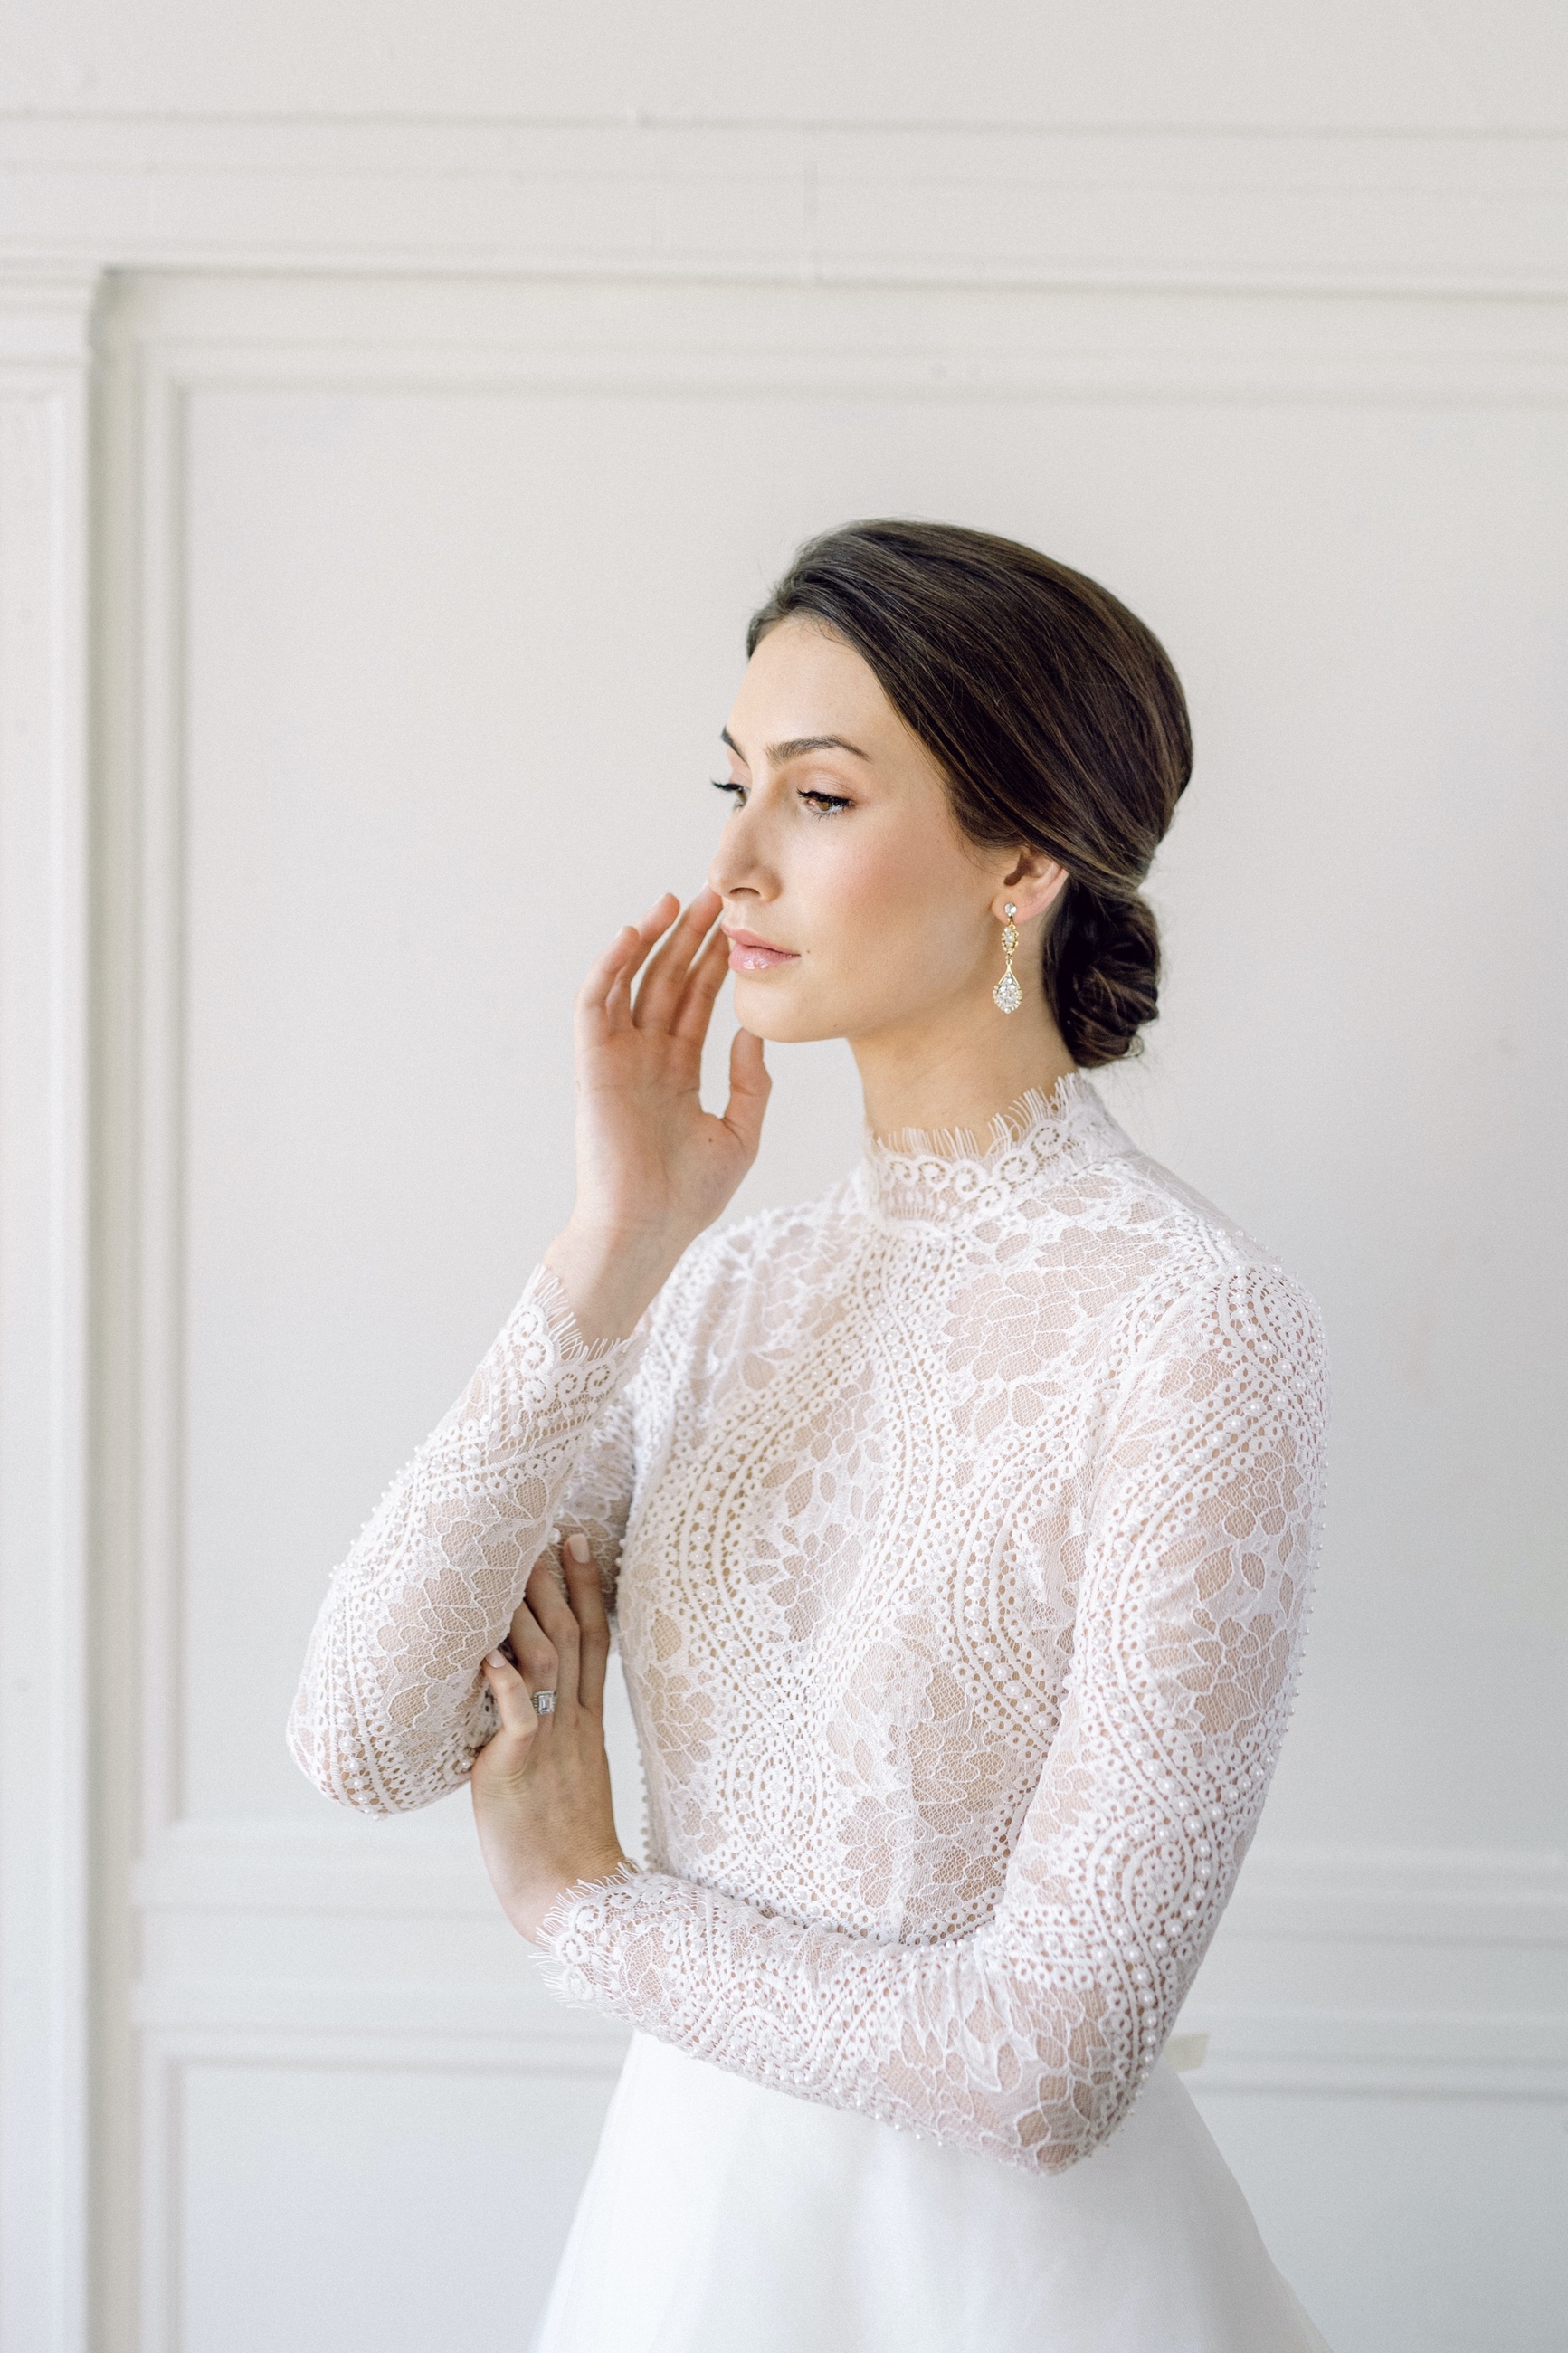 Lace Wedding Gowns We&#39;re Loving Image